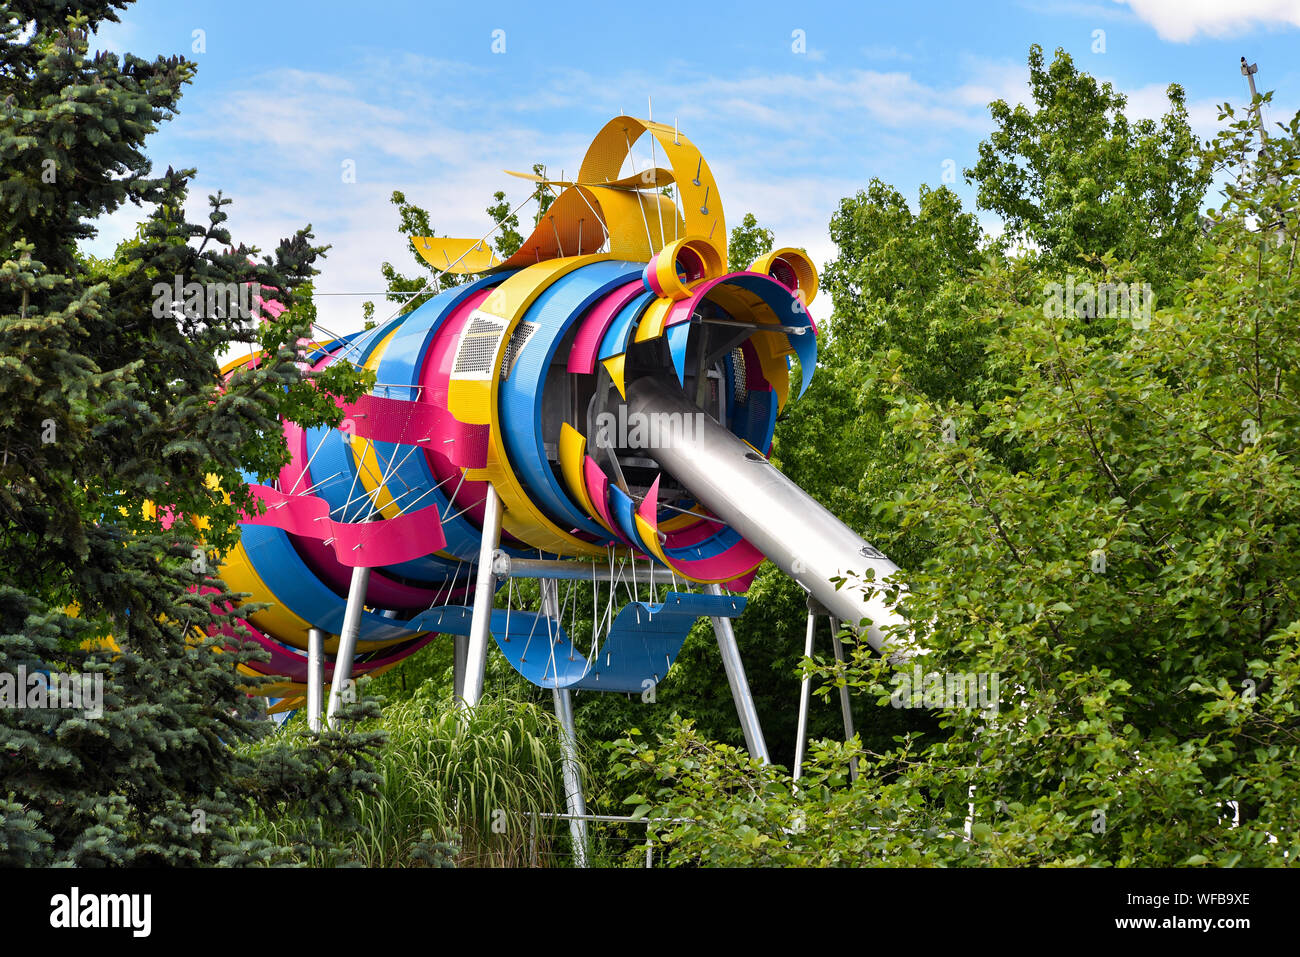 PARIS, FRANCE - JULY 16, 2016: The garden of Dragon is a free play area for children in Parc de la Villette. The colorful Dragon slide, made of steel, Stock Photo